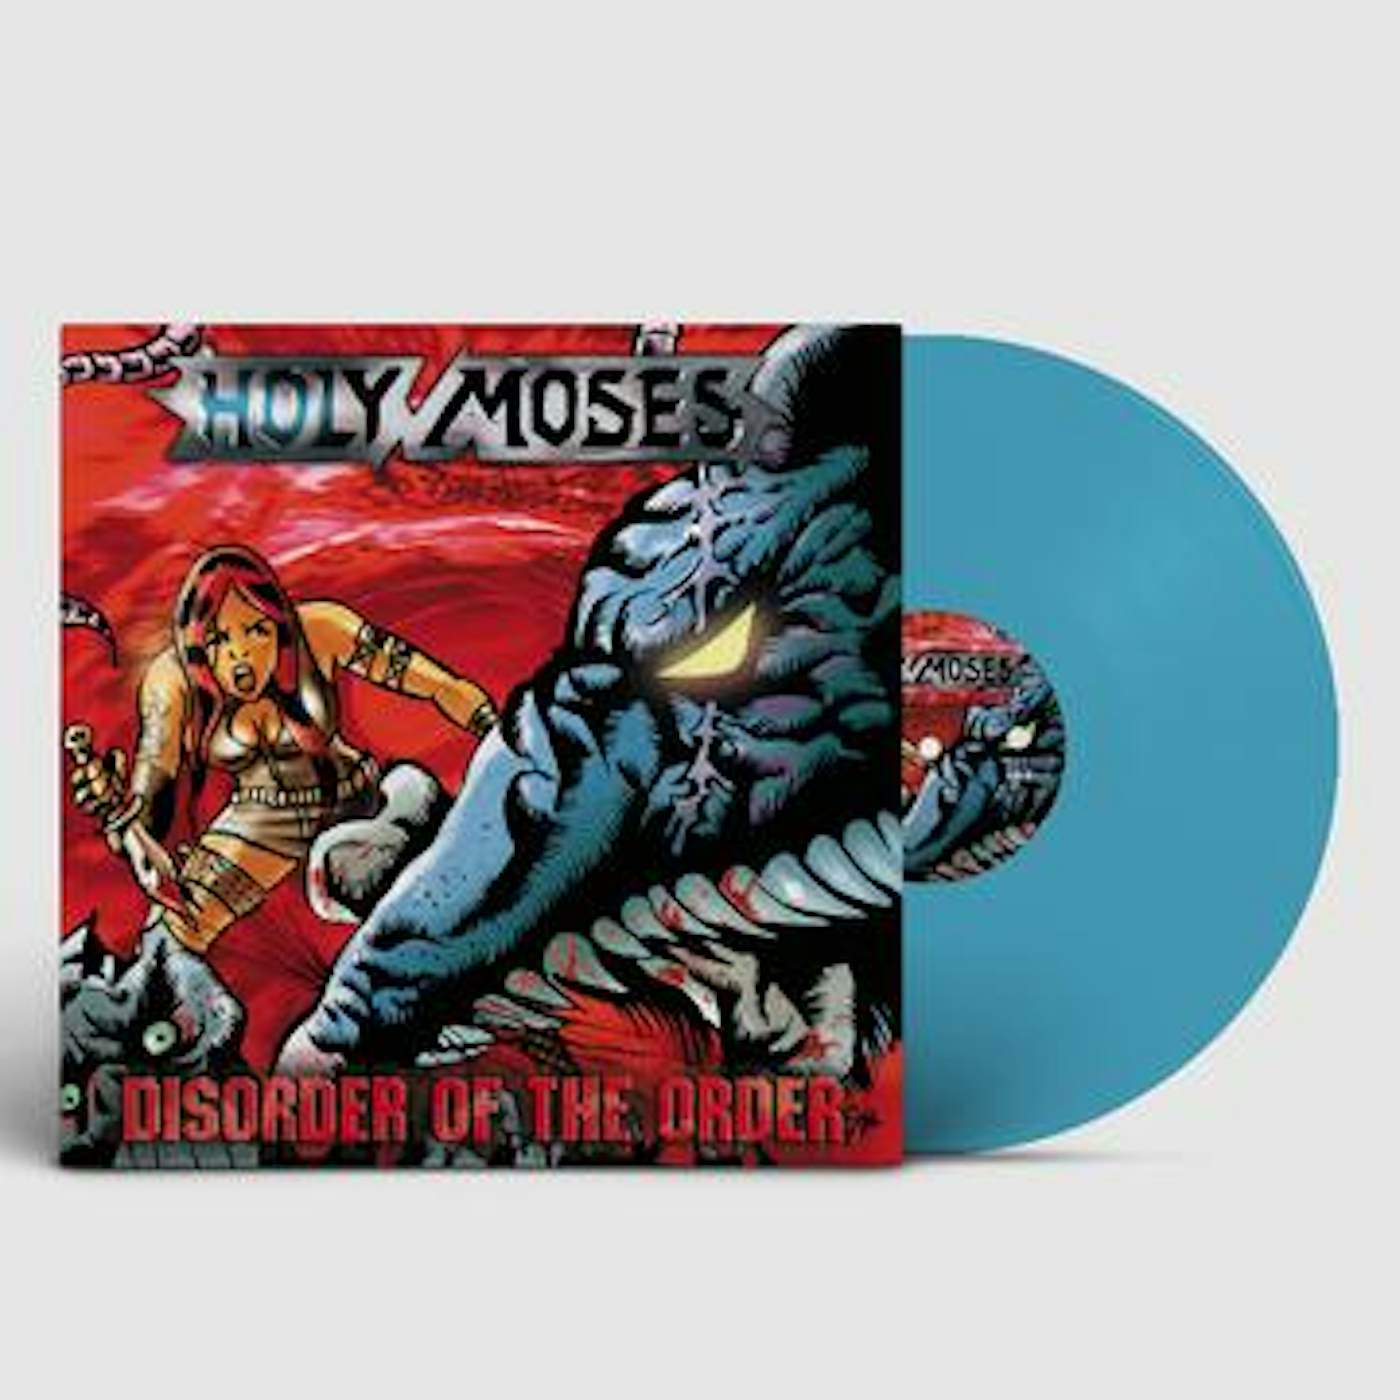 Holy Moses Disorder Of The Order vinyl record